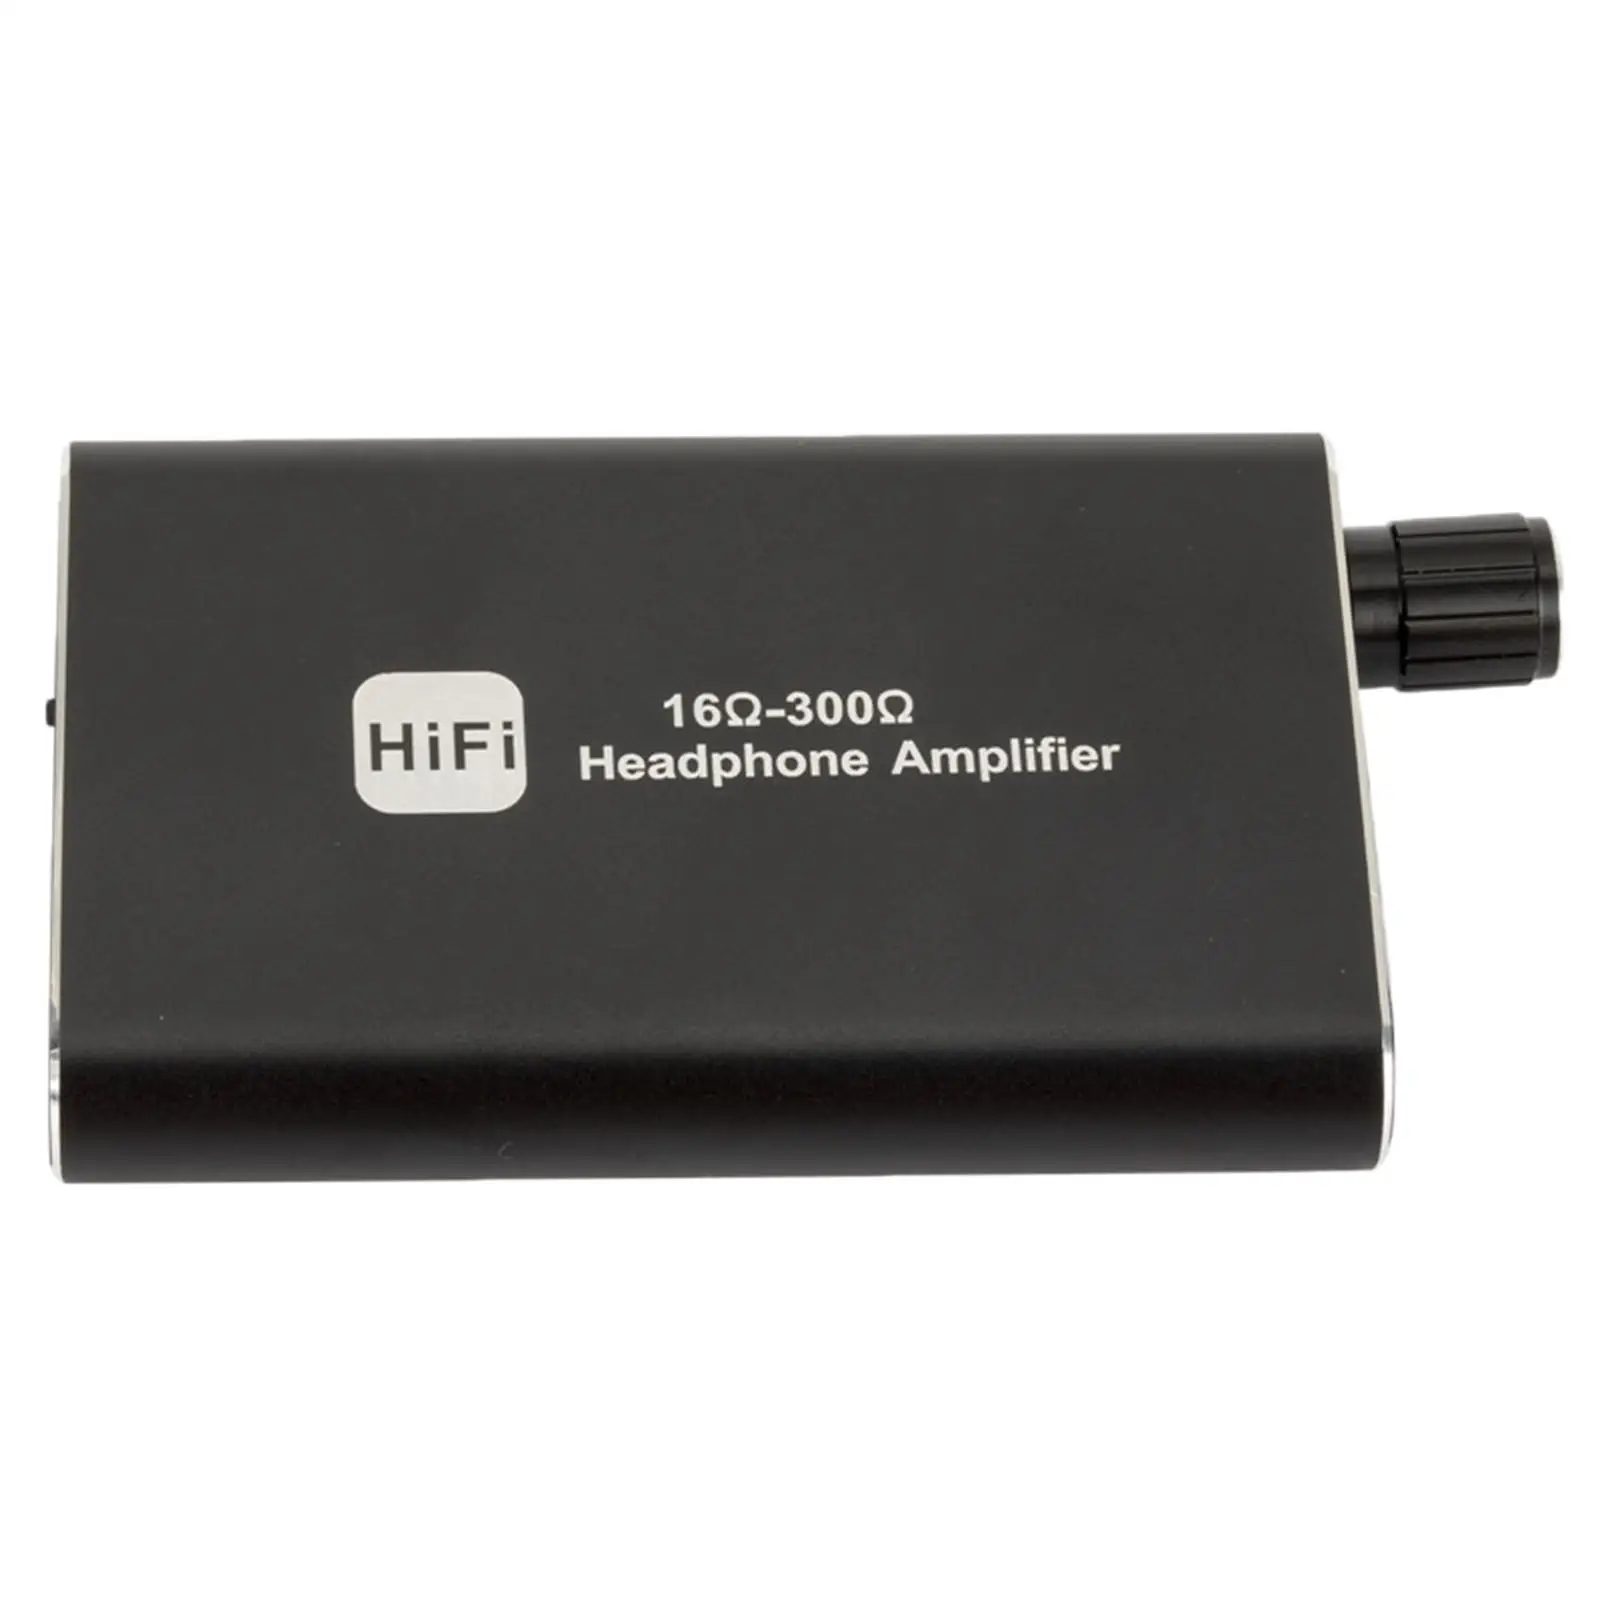 HIFI Headphone Amplifier Earphone AMP 3.5mm Stereo Audio Input Out Volume Control w/ Audio USB Cable 16-300